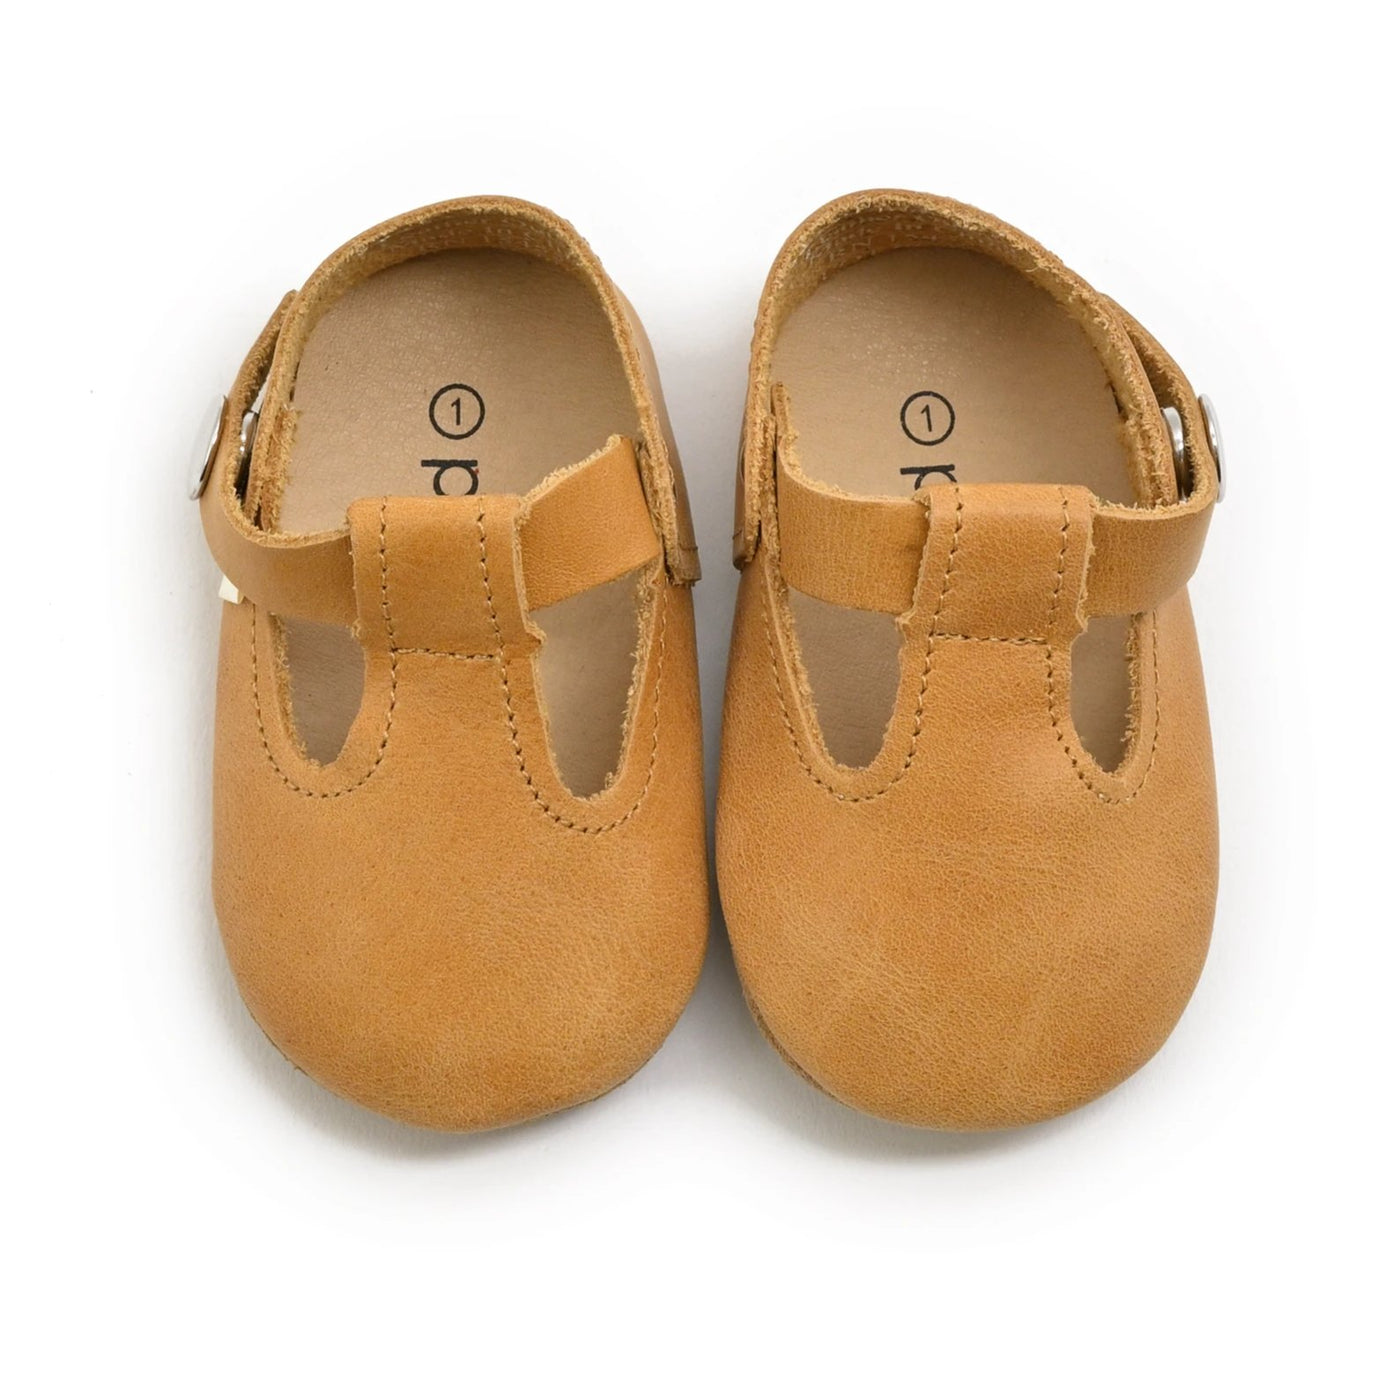 Piper Finn - Baby & Toddler Girl Shoes - T-Strap Mary Jane - Natural ...